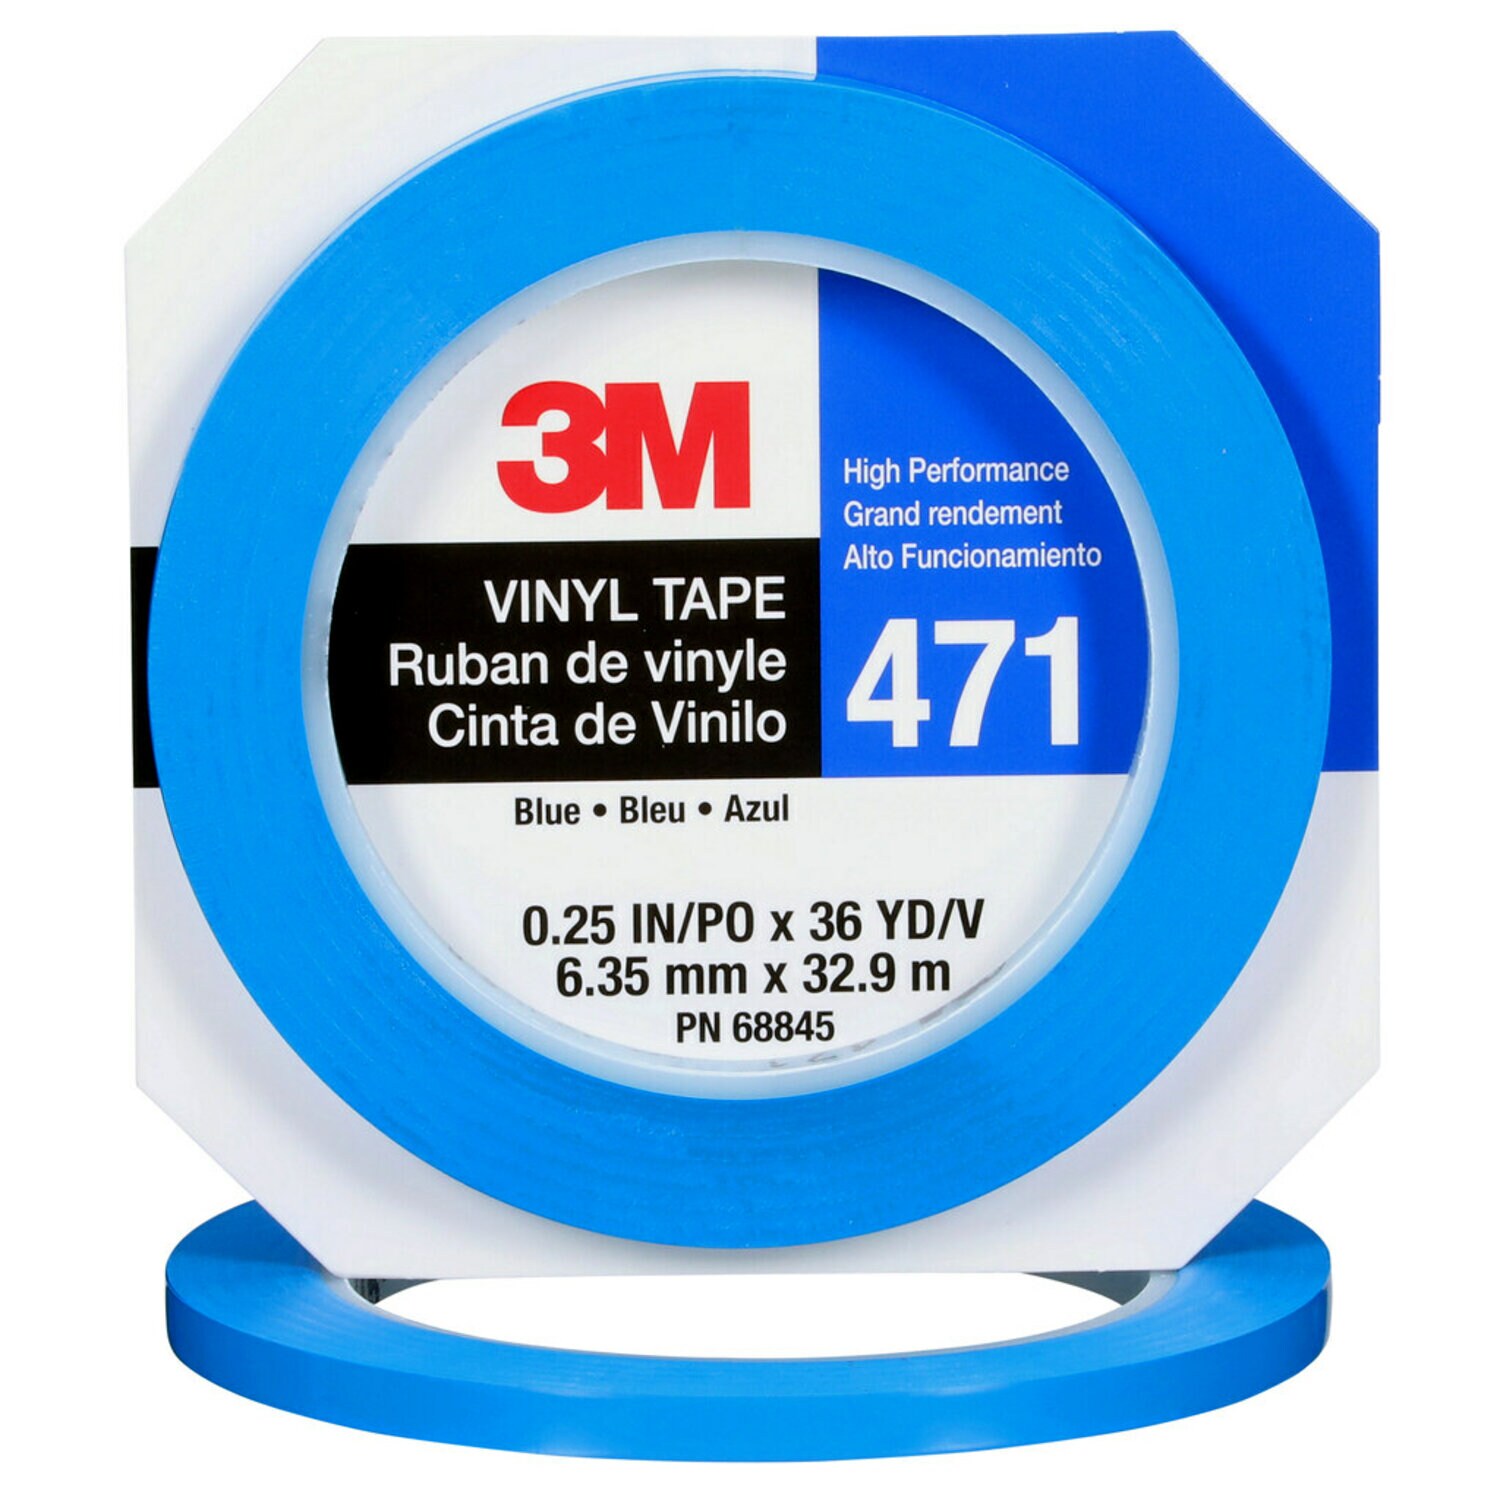 7100044626 - 3M Vinyl Tape 471, Blue, 1/4 in x 36 yd, 5.2 mil, 144 rolls per case,
Individually Wrapped Conveniently Packaged